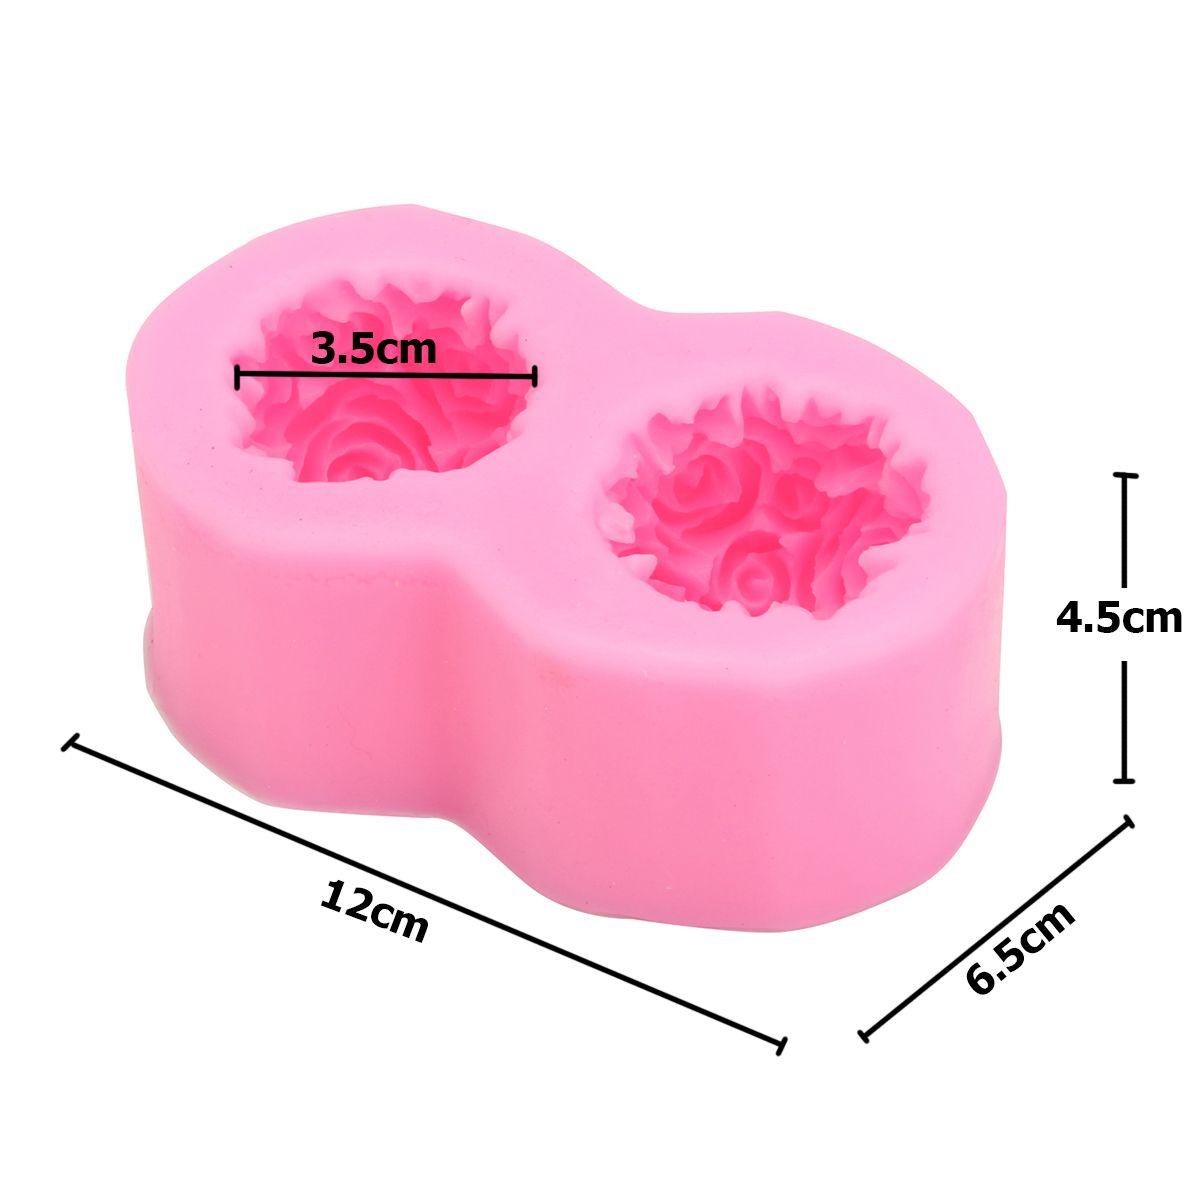 Flexible-3D-Rose-Flower-Ball-Mould-Soft-Silicone-Soap-Candle-Making-DIY-Mold-1391930